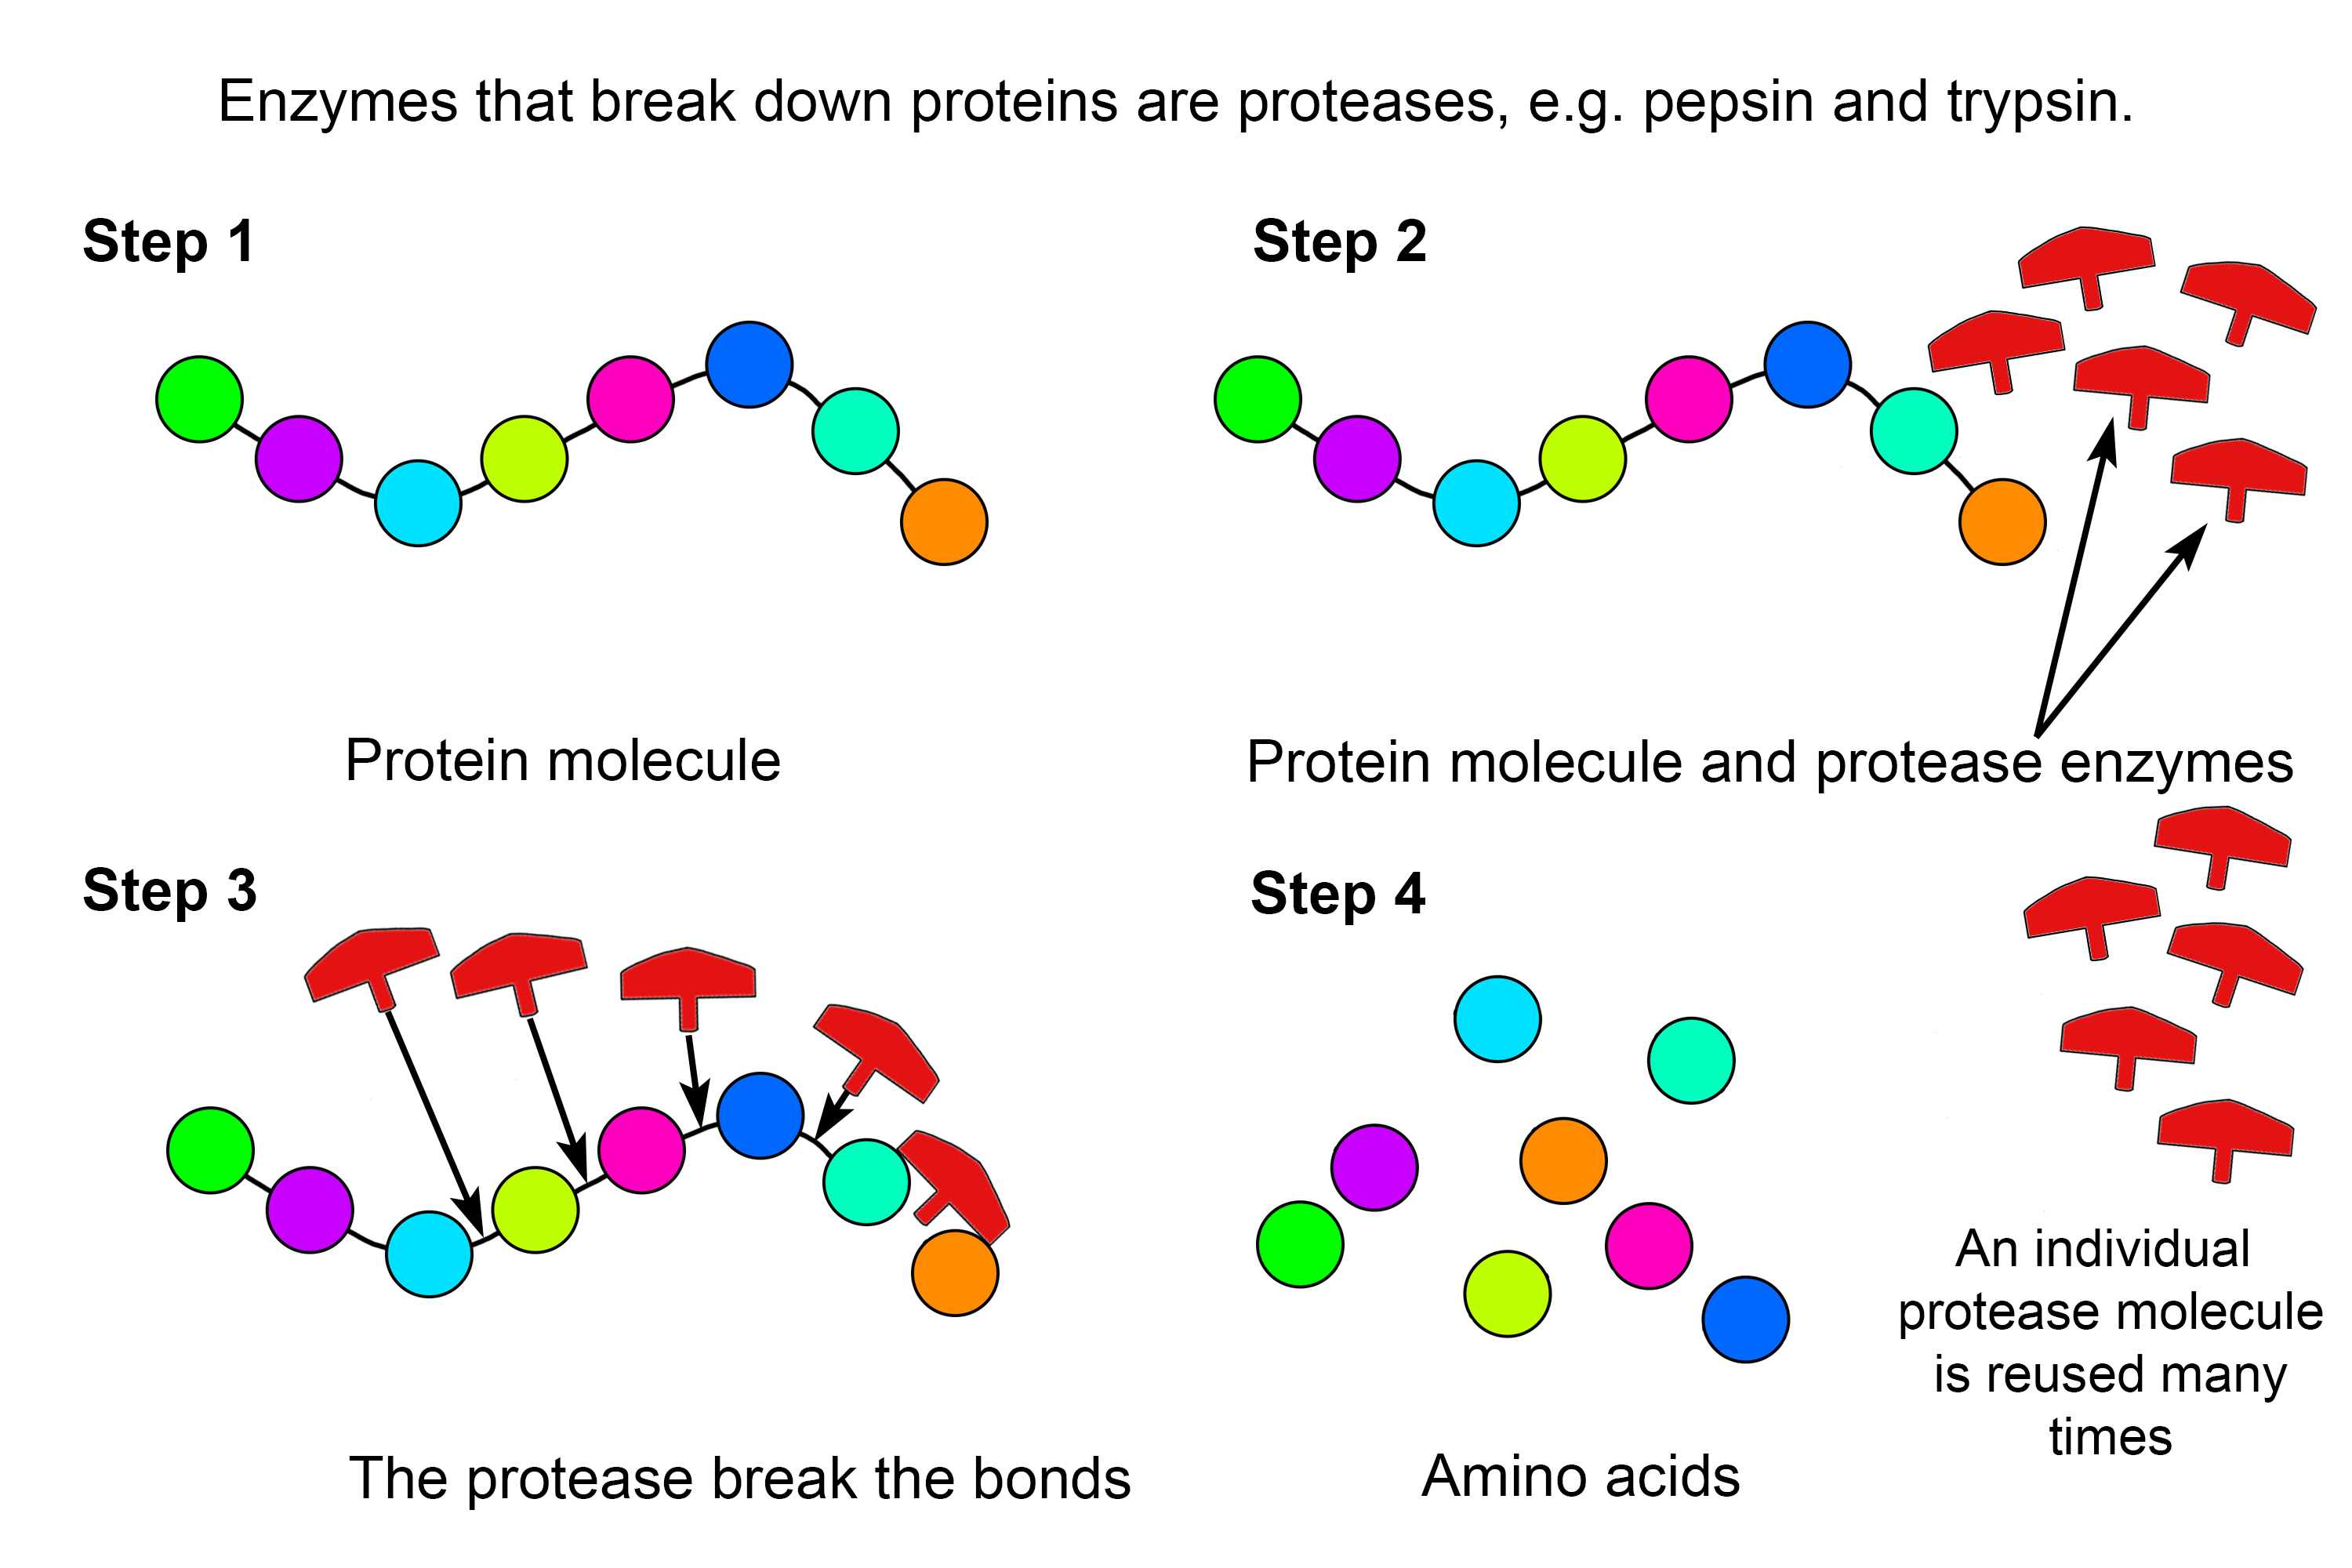 Protease enzymes break protein bonds to produce amino acids